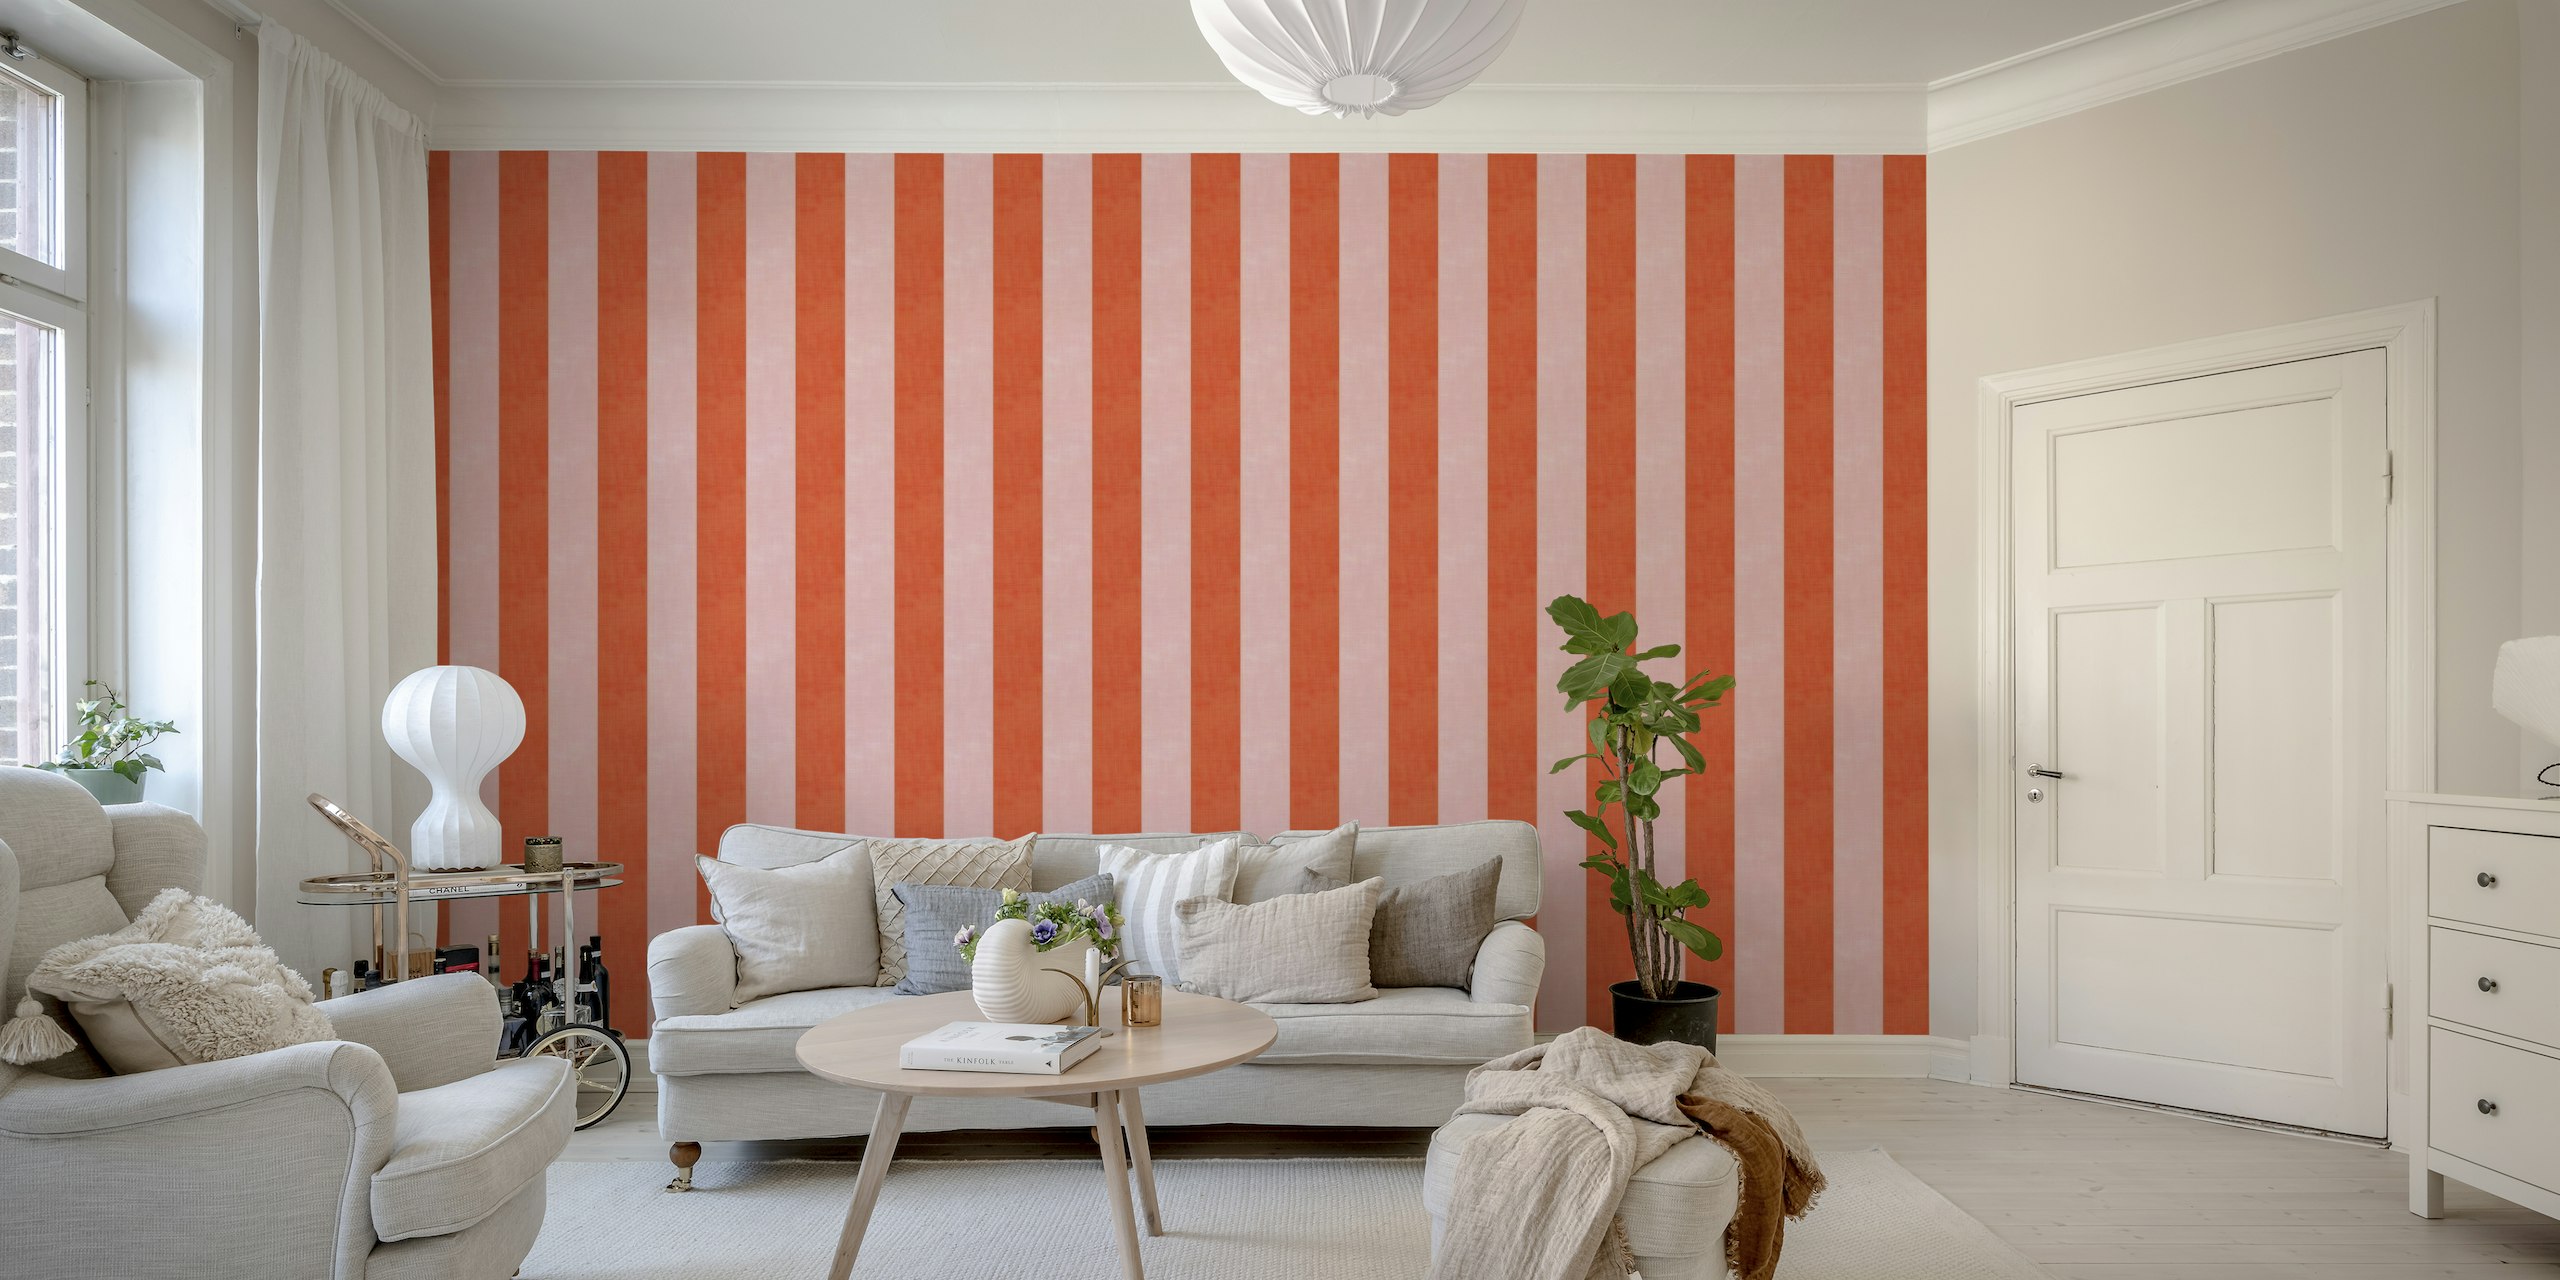 Orange and pink striped wall mural